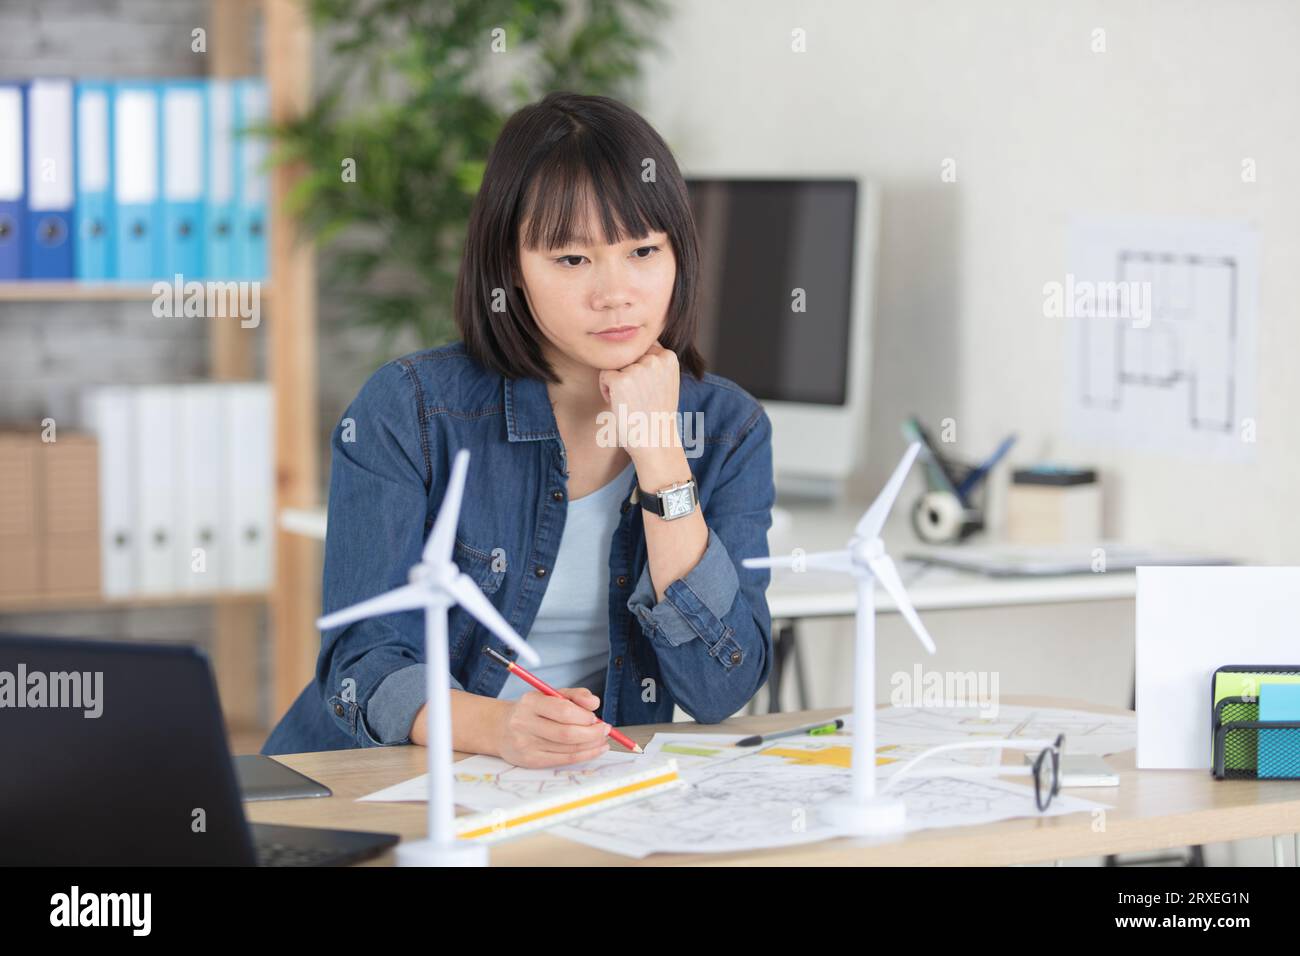 female architect working at home Stock Photo